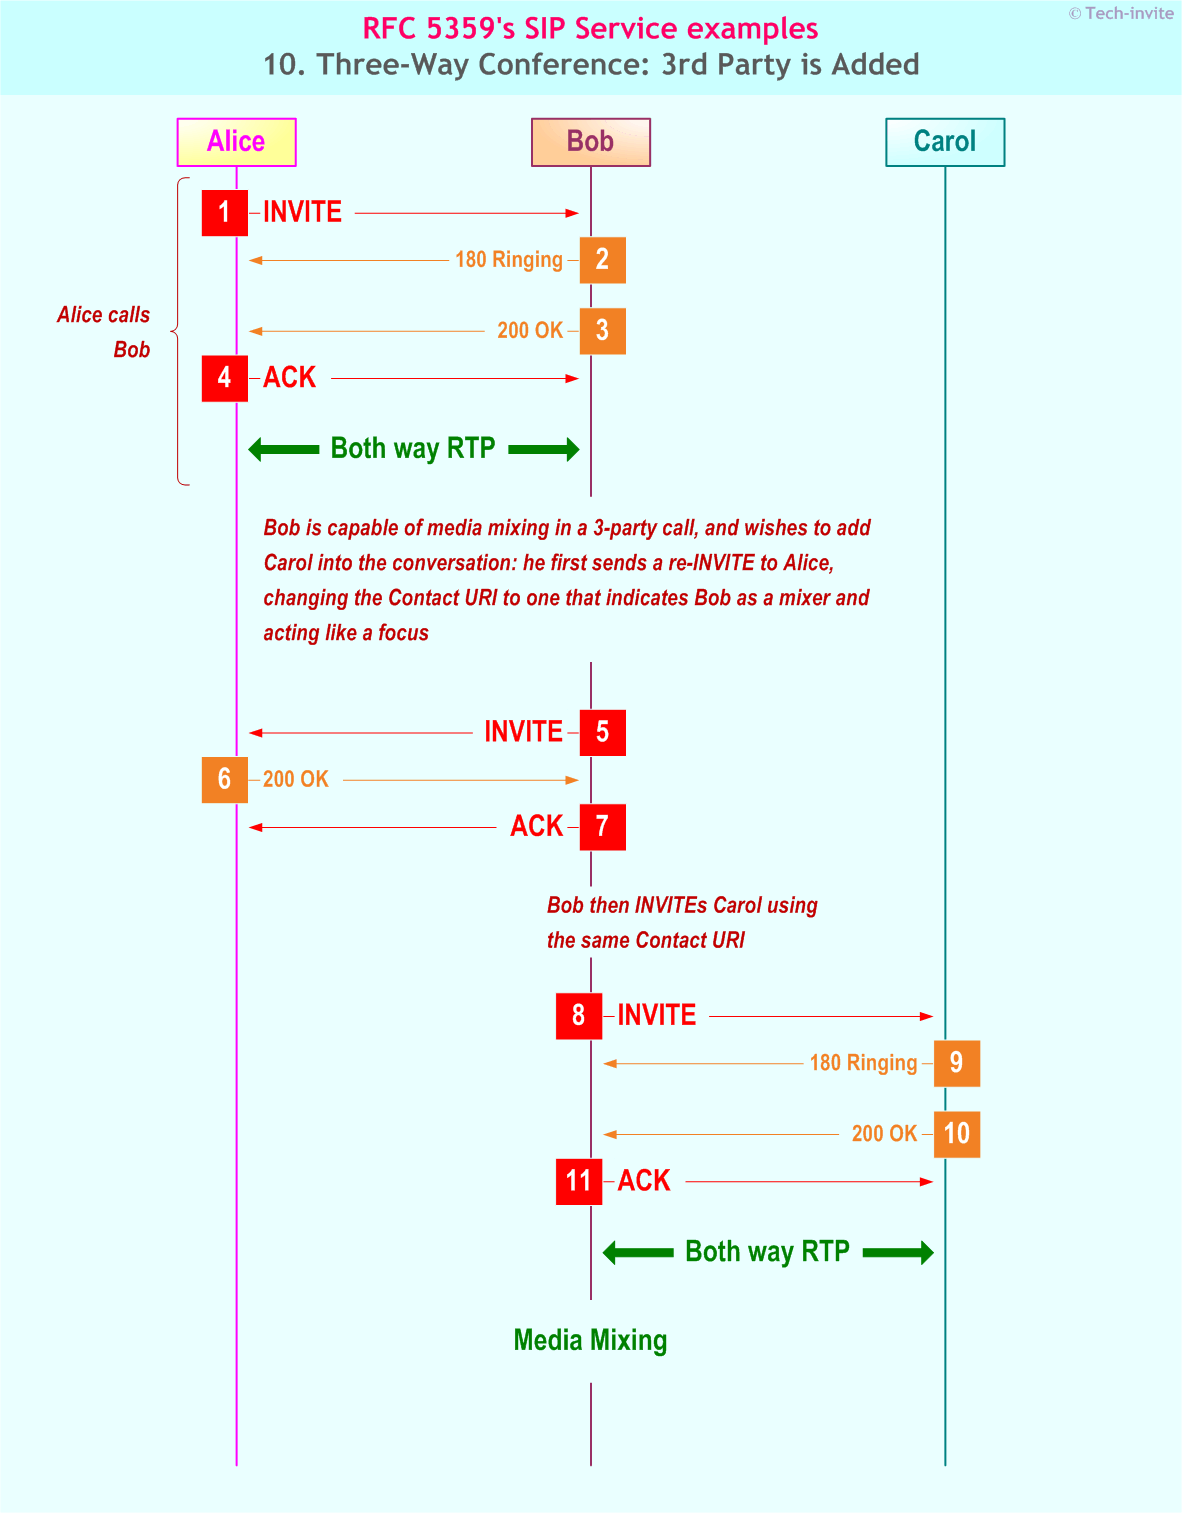 3Way Conference (Third Party is Added) SIP Service example Sequence chart